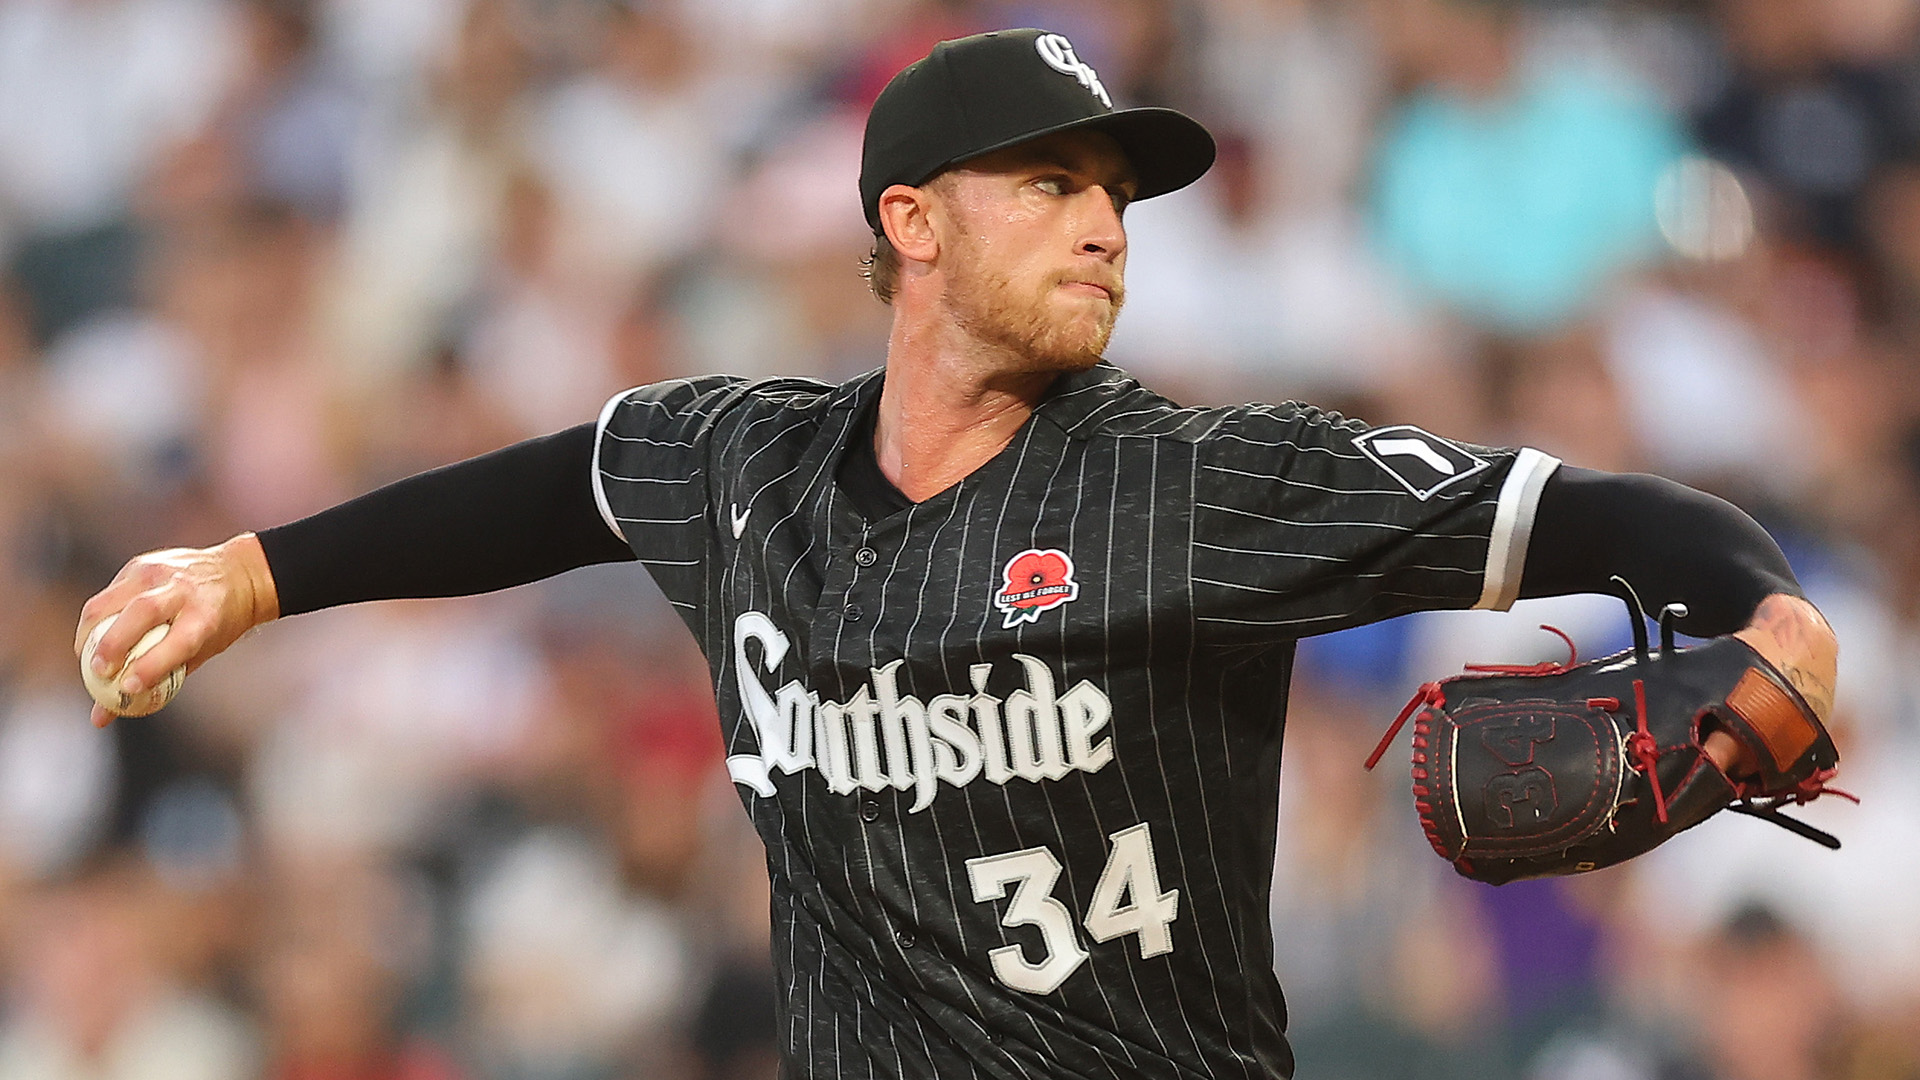 White Sox: Michael Kopech on possibility of tipping pitches that